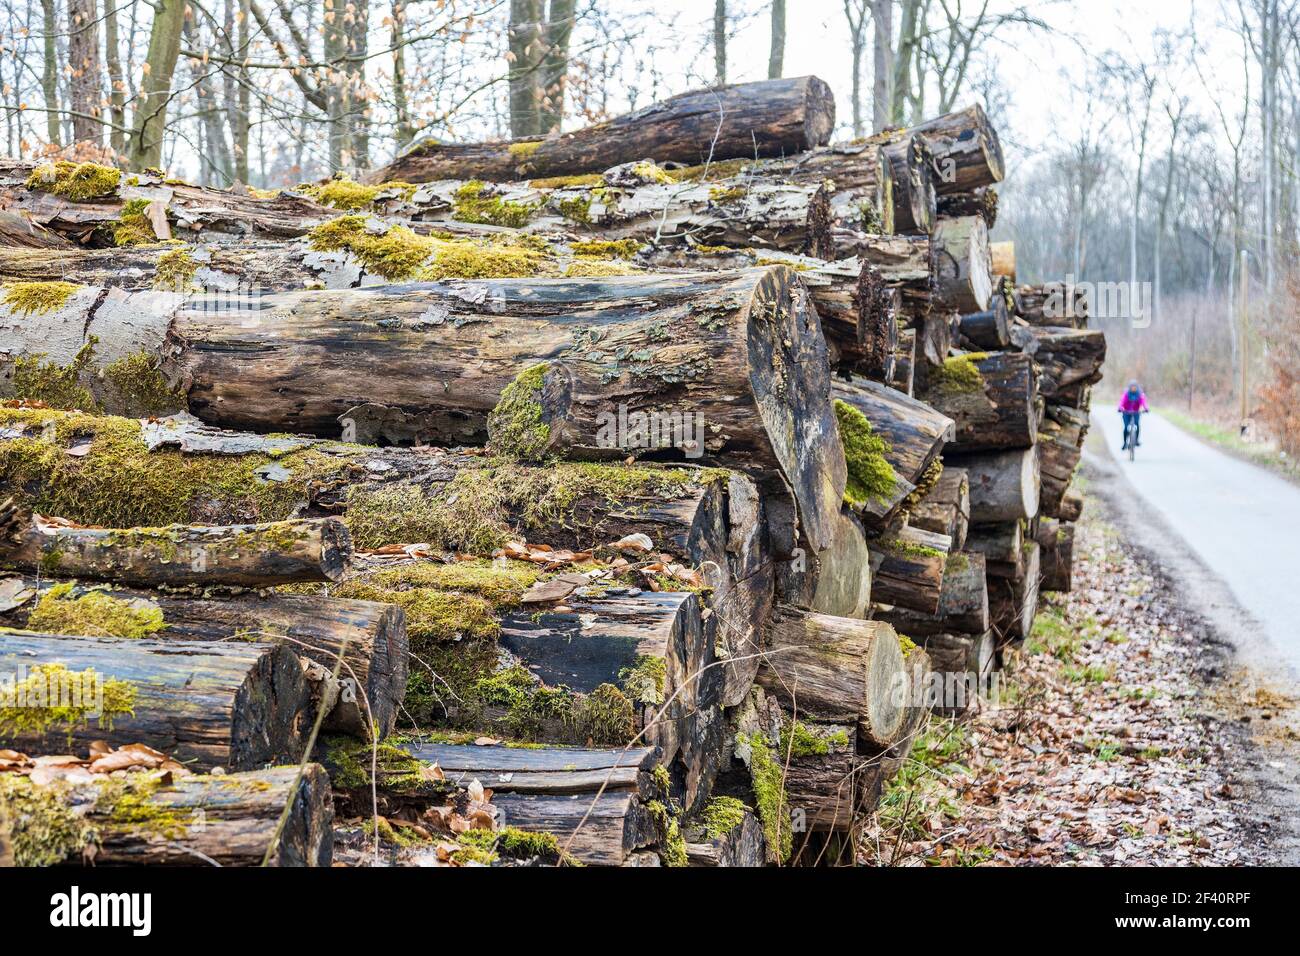 Stacked wooden logs overgrown with fungi, lichen and moss, Mülheim an der Ruhr, Ruhr Area, Germany, Europe Stock Photo